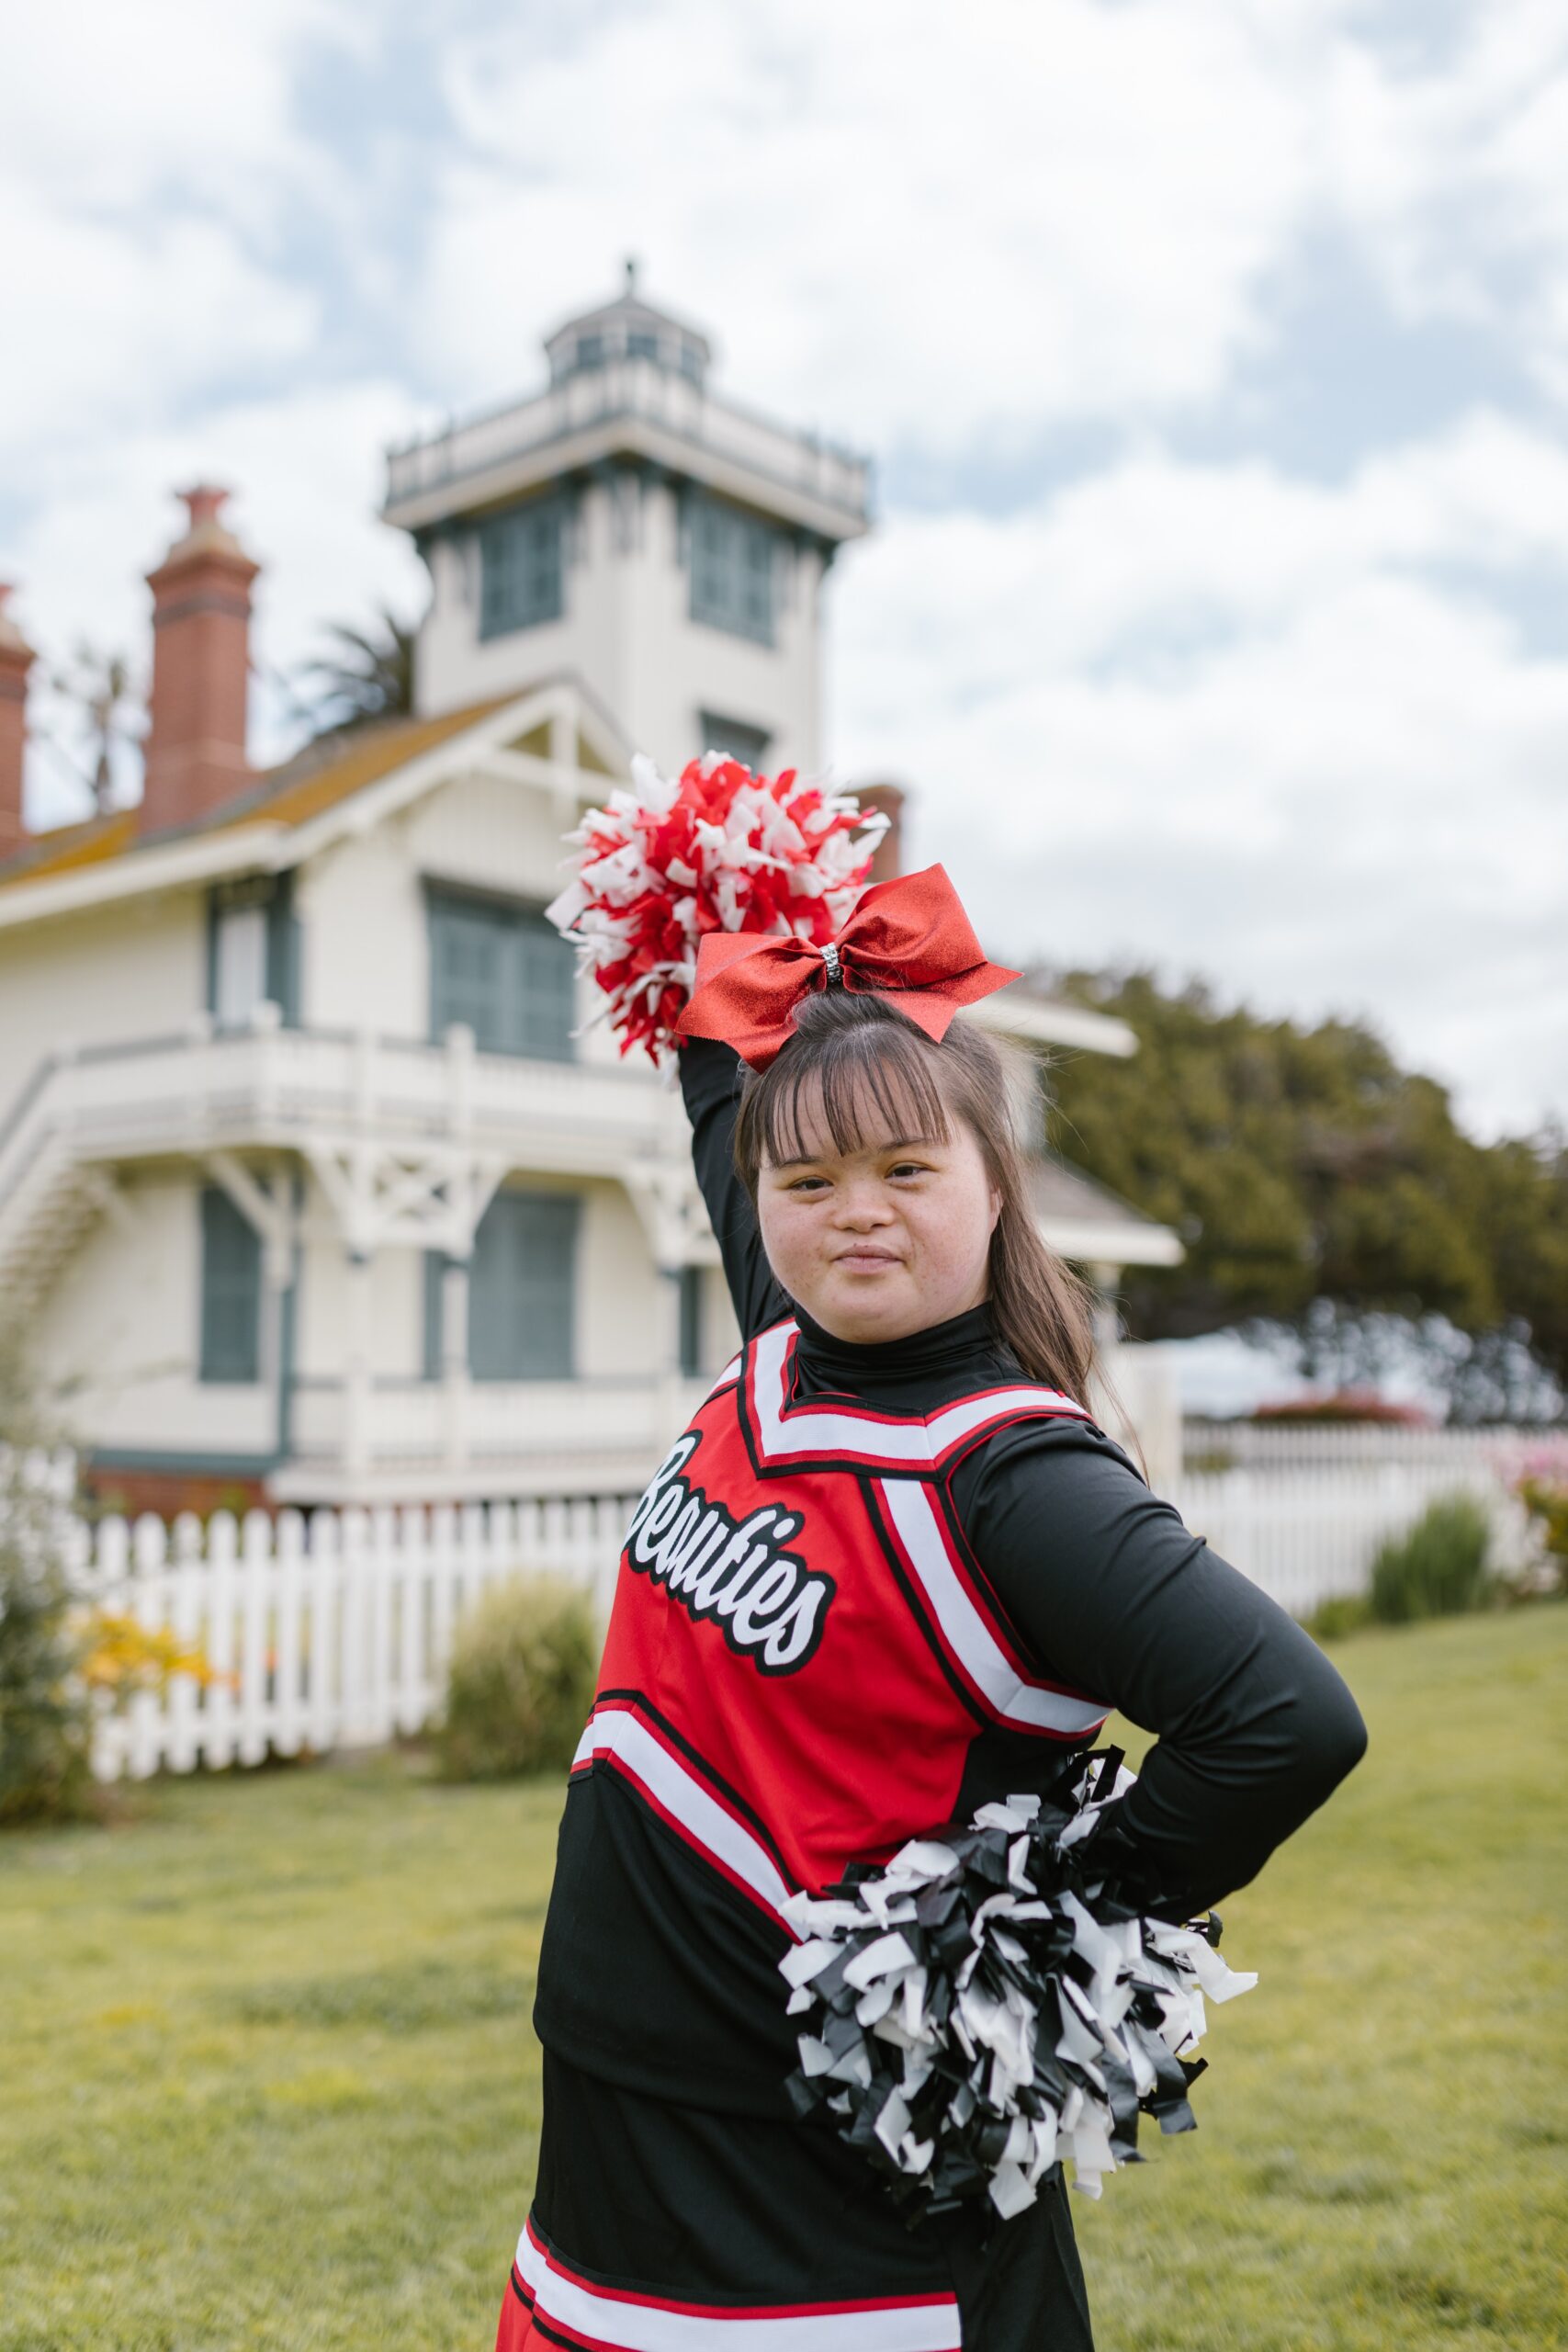 a cheerleader with down syndrome wearing a black, red, and white uniform. She is holding one black and white pom pom on her hip and one red and white pom pom above her head. She stands outside in the grass in front of a large house and cloudy sky.